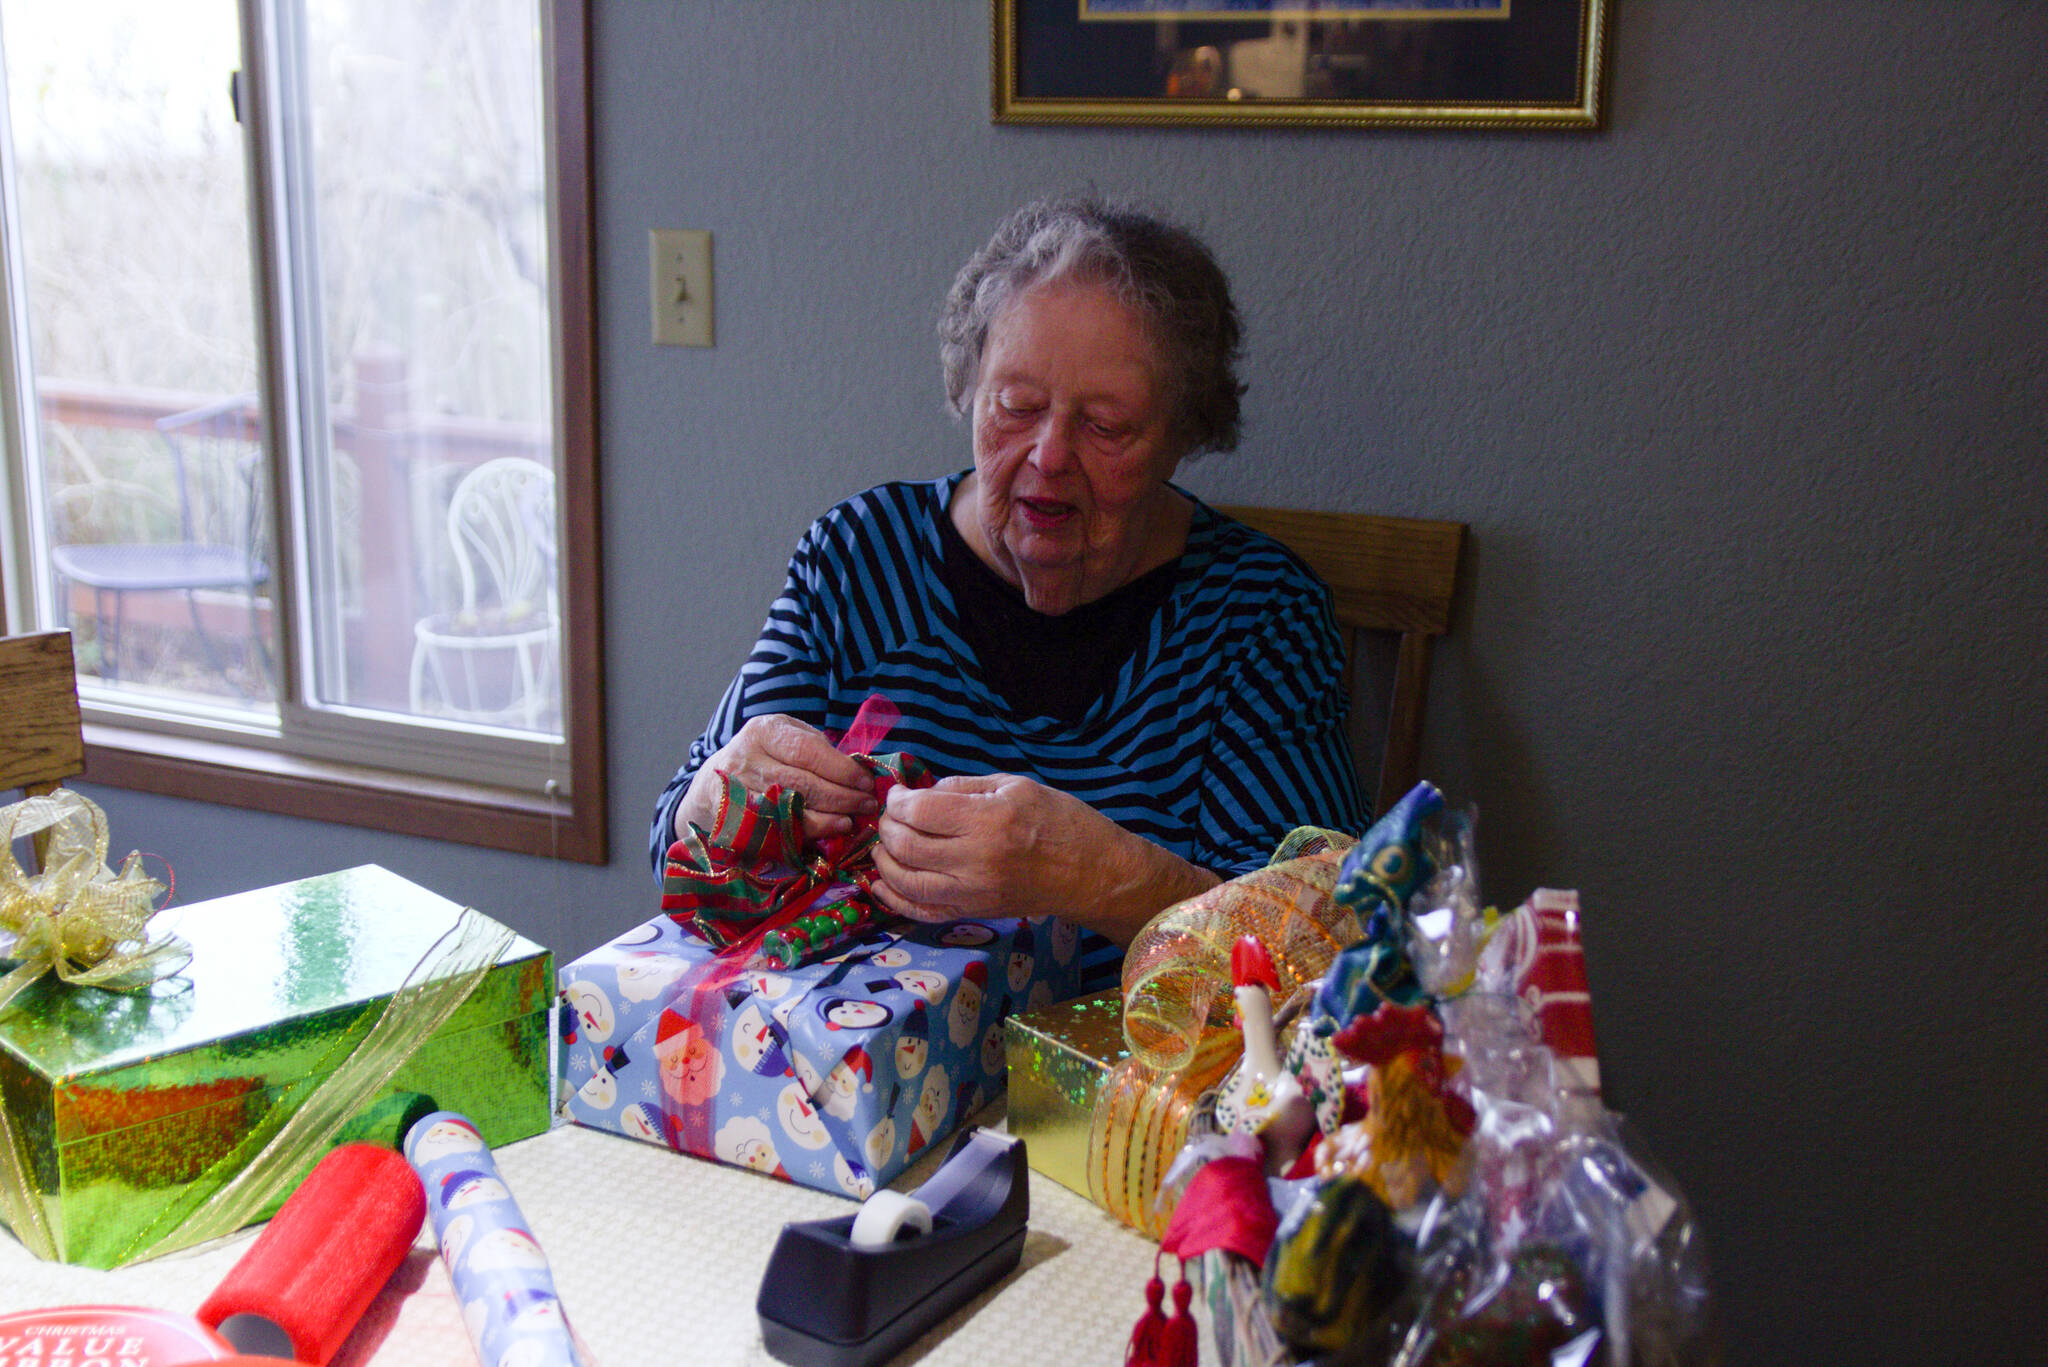 June Zacharias prepares gifts for the Holiday House at her house in Oak Harbor. Every year, she begins to prepare for the event in January, buying gift wrap paper, ribbons and more. (Photo by Luisa Loi)